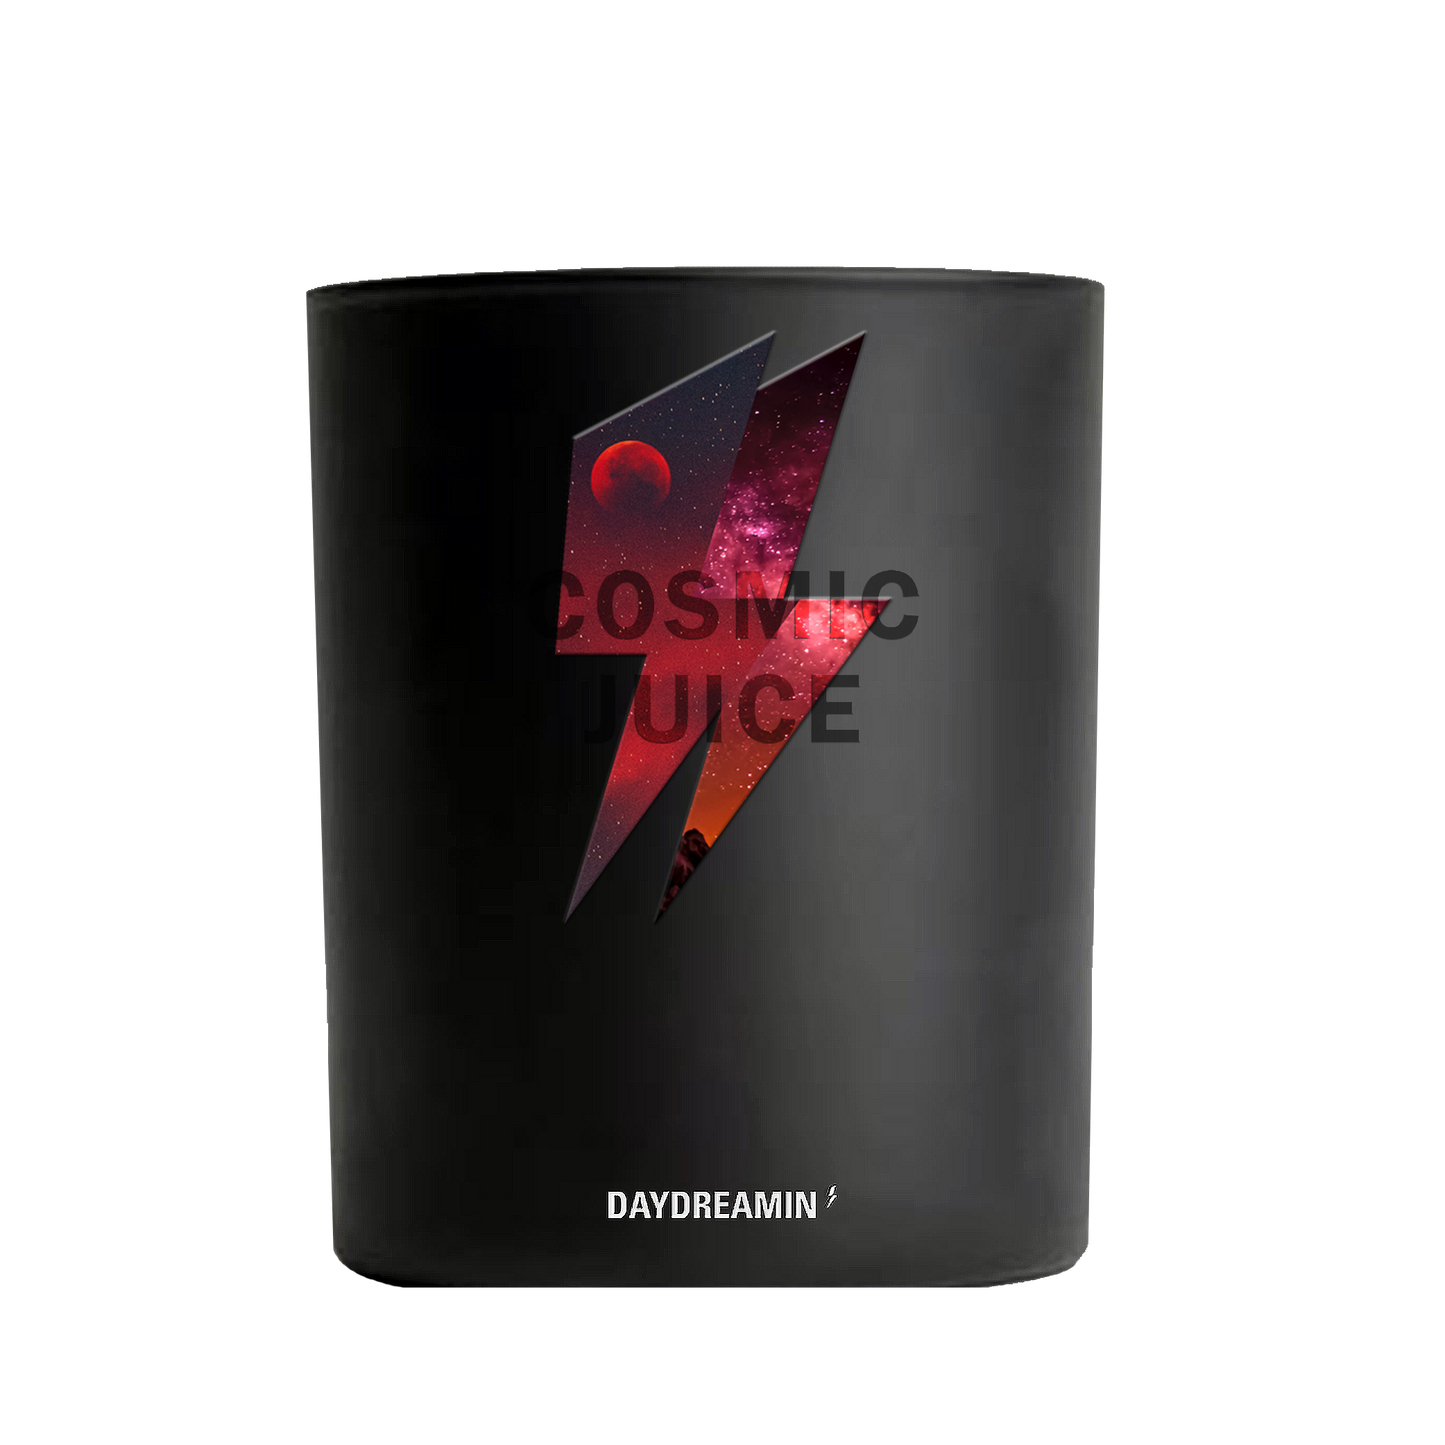 Cosmic Juice Scented Candle by DAYDREAMIN' UK